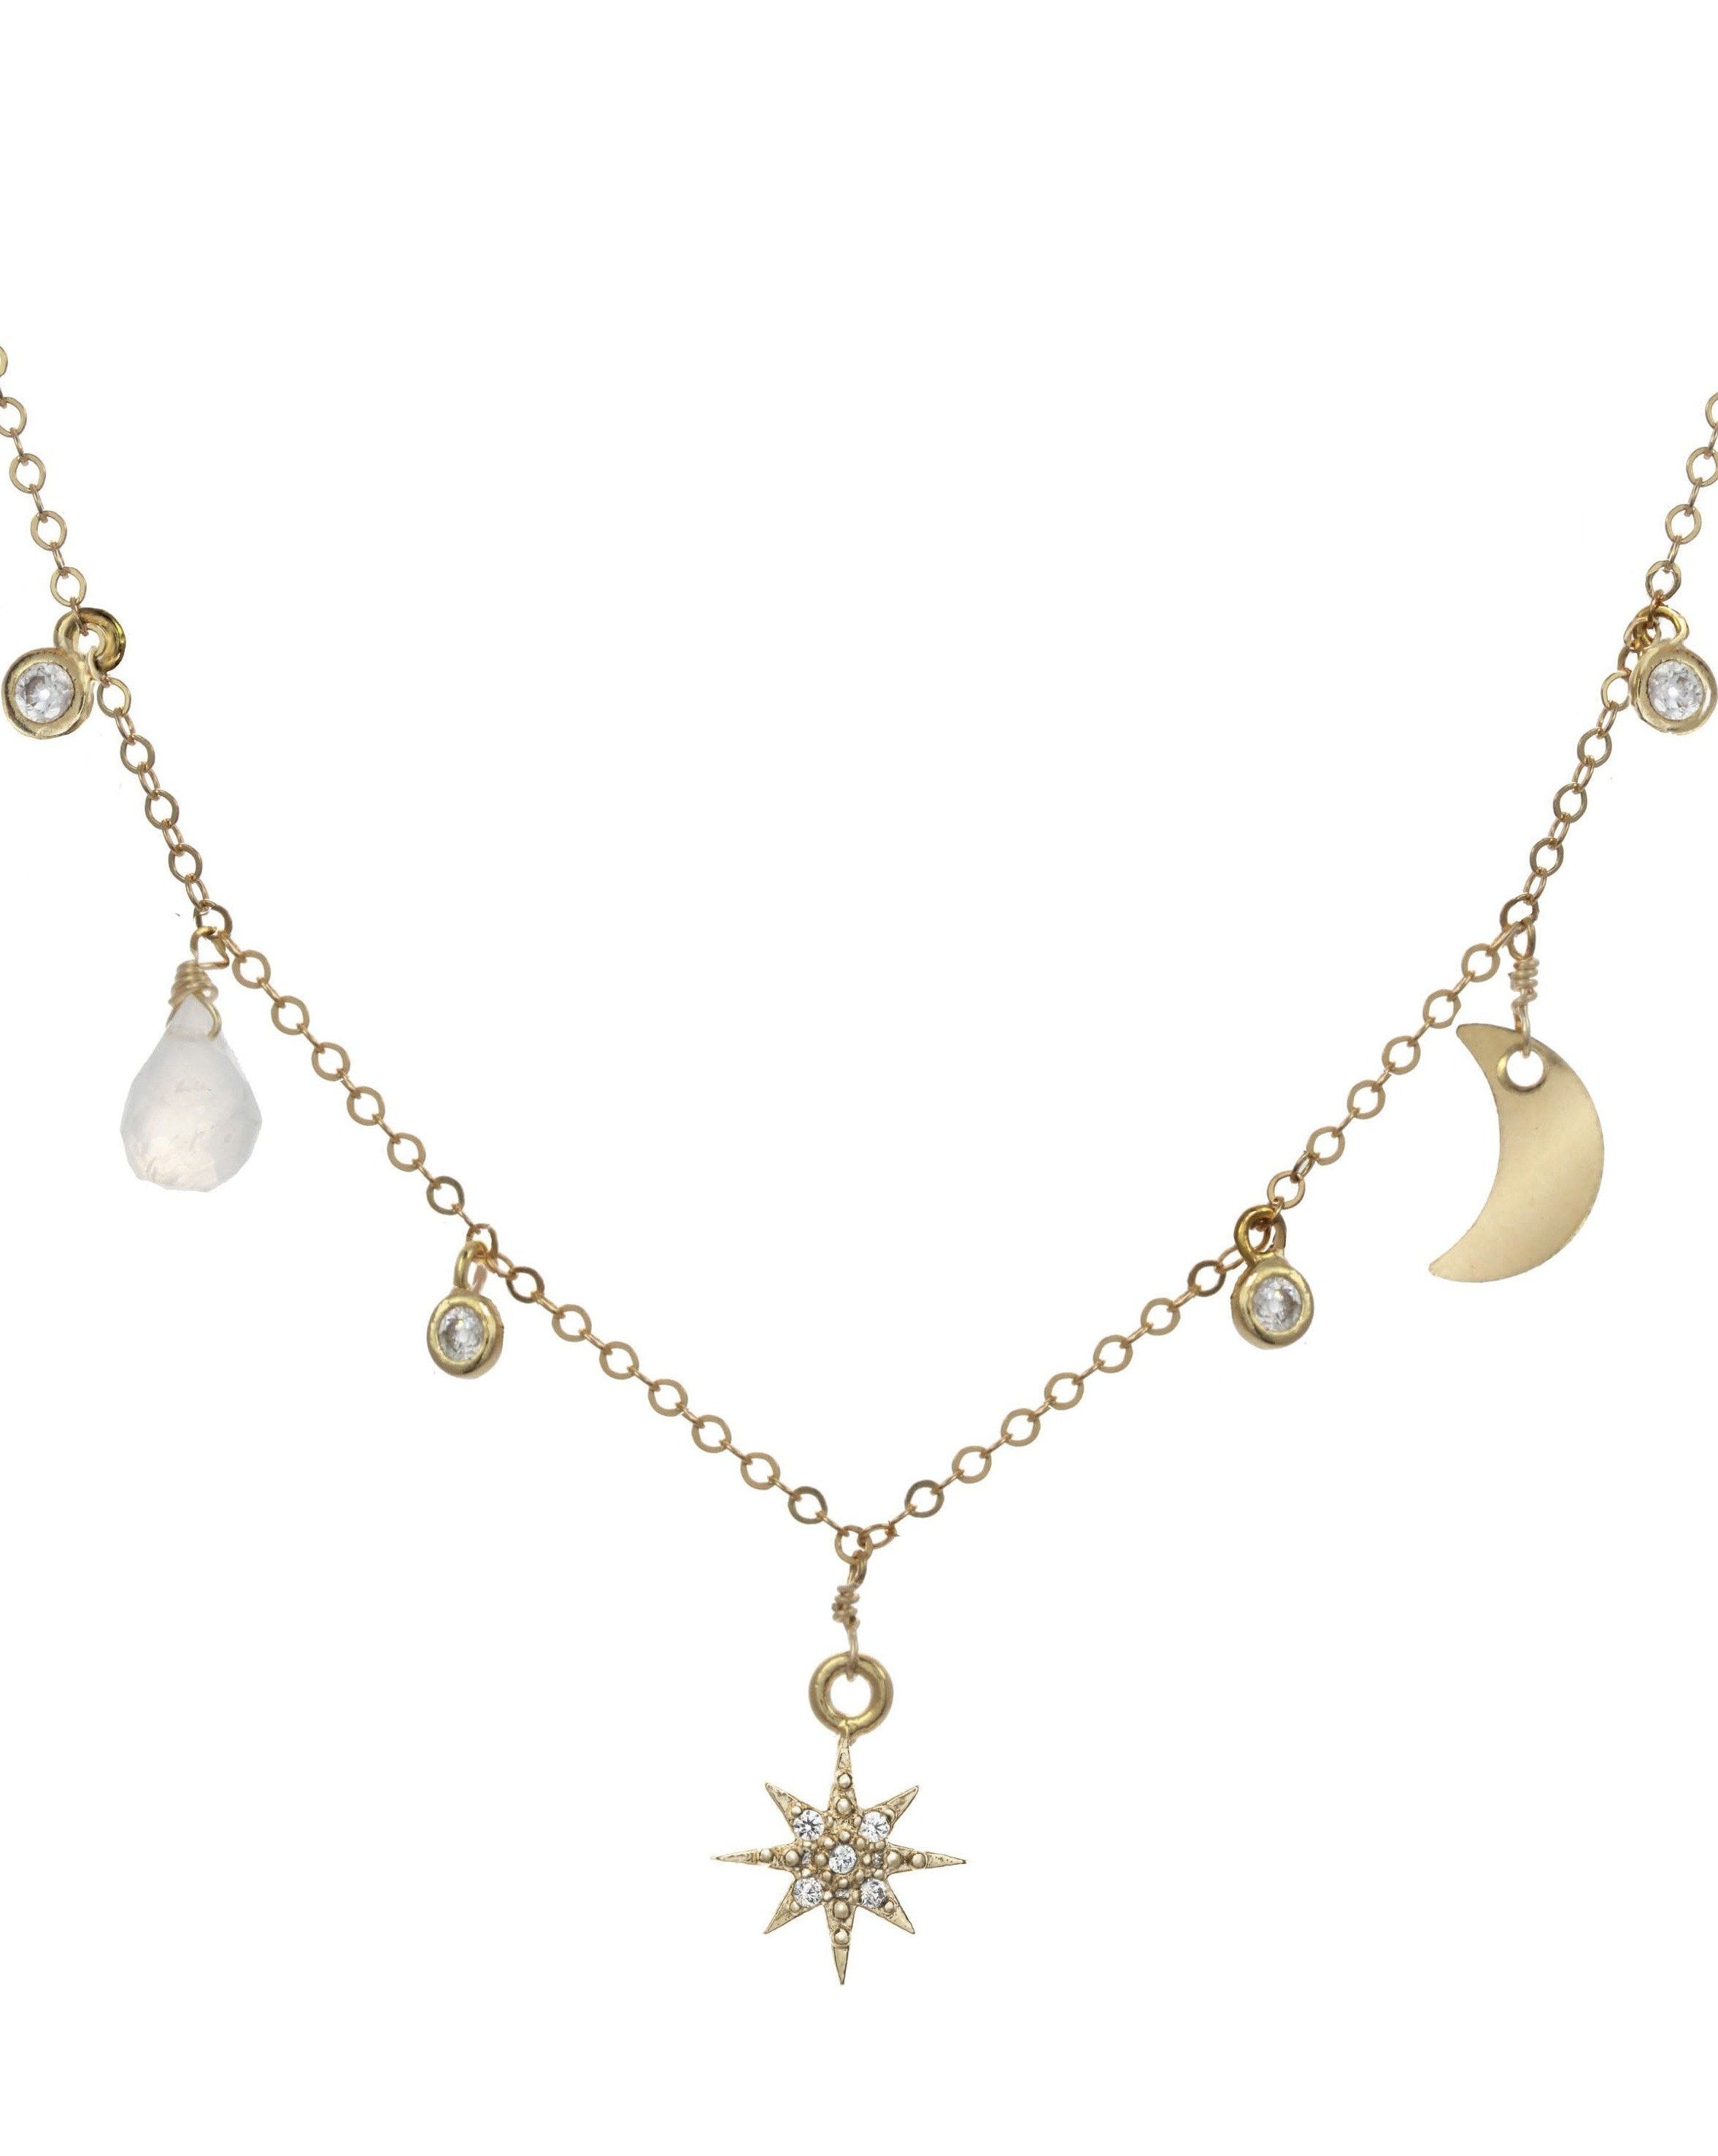 Priya Necklace by KOZAKH. A 16 to 18 inch adjustable length necklace, crafted in 14K Gold Filled, featuring a faceted moonstone droplet, a moon charm, a Cubic Zirconia 8 point star charm, and 2mm CZ bezel charms.